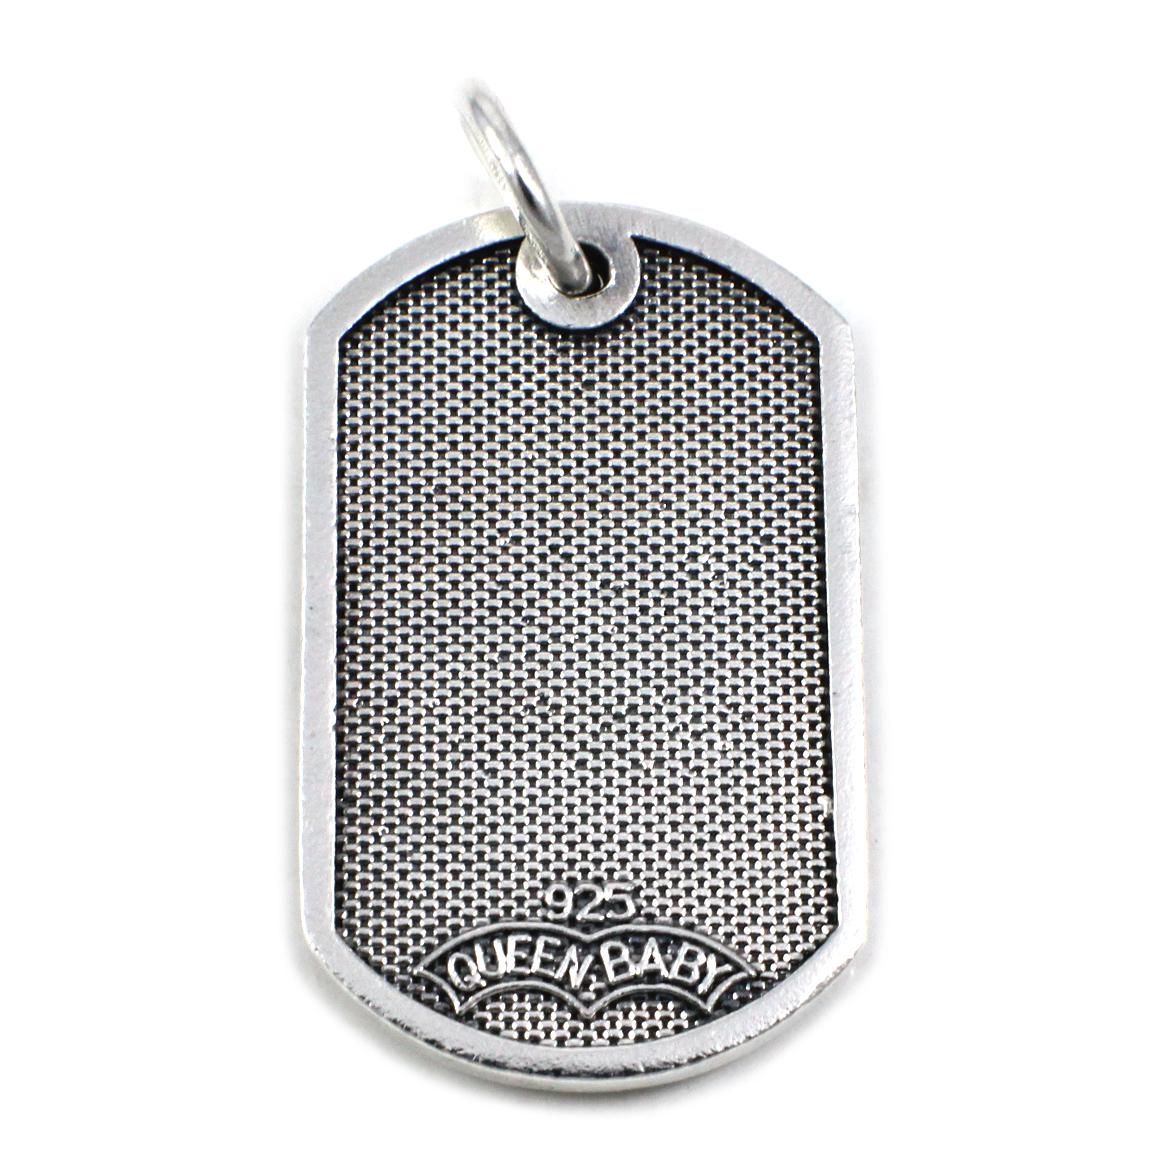 This pendant is made in sterling silver by designer Queen Baby. The dog tag is set with a cross in the front, and it is signed 